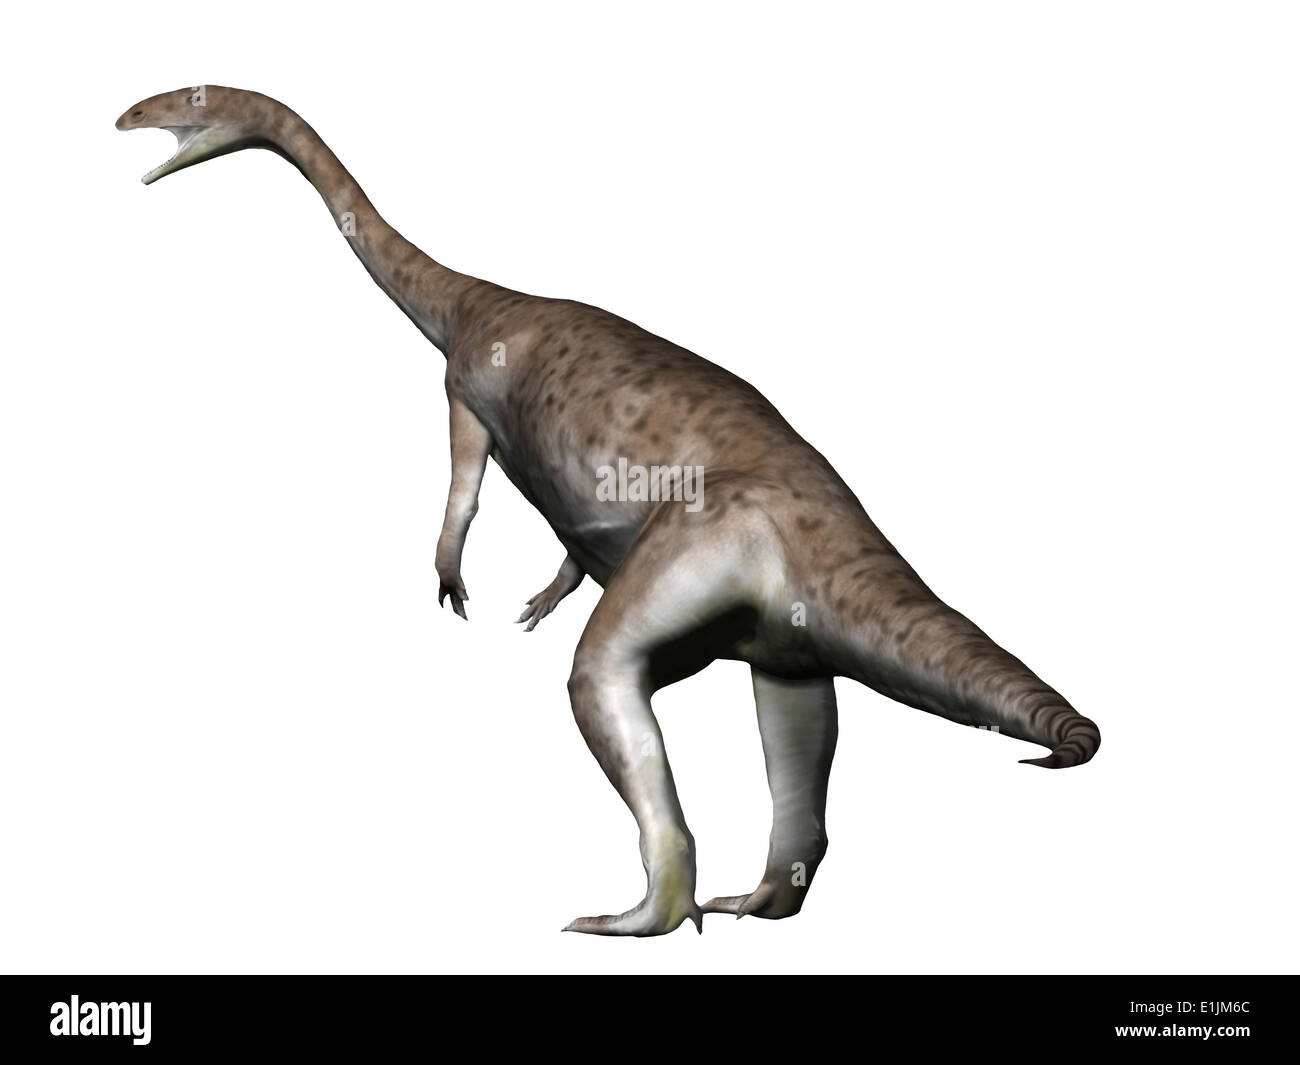 Anchisaurus is a prosauropod dinosaur from the Jurassic Period. Stock Photo